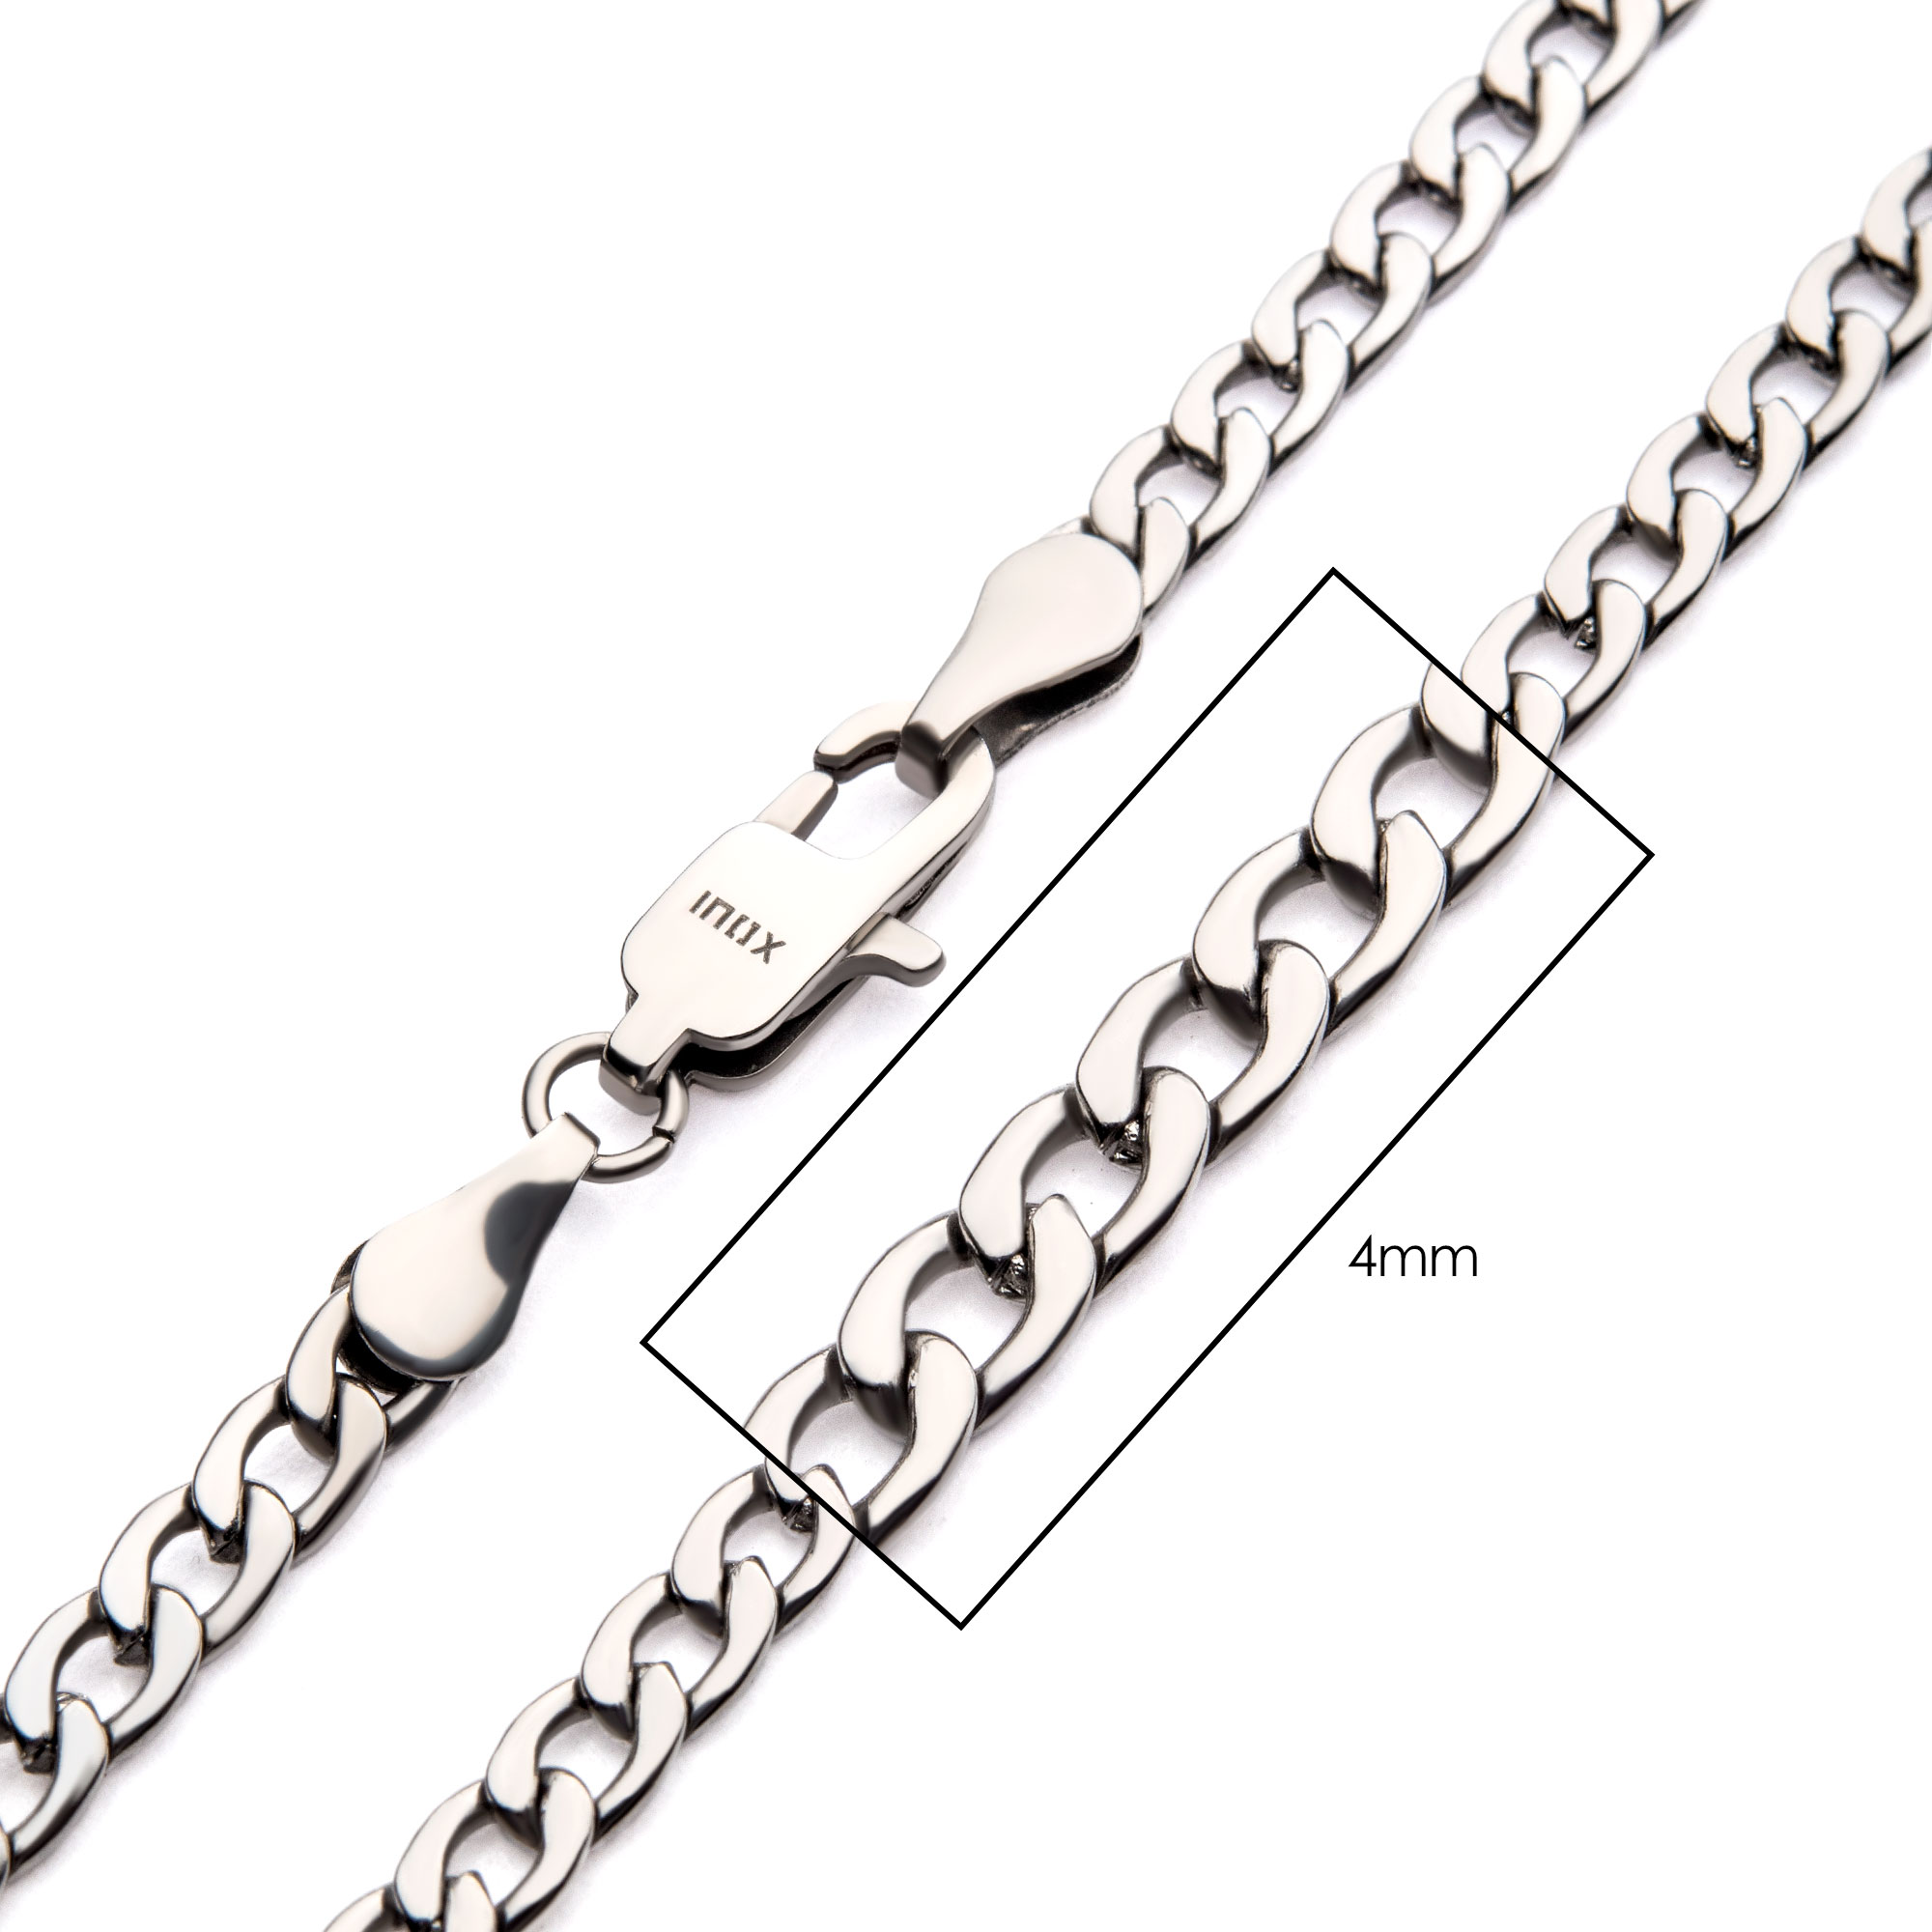 4mm Steel Classic Curb Chain Enchanted Jewelry Plainfield, CT